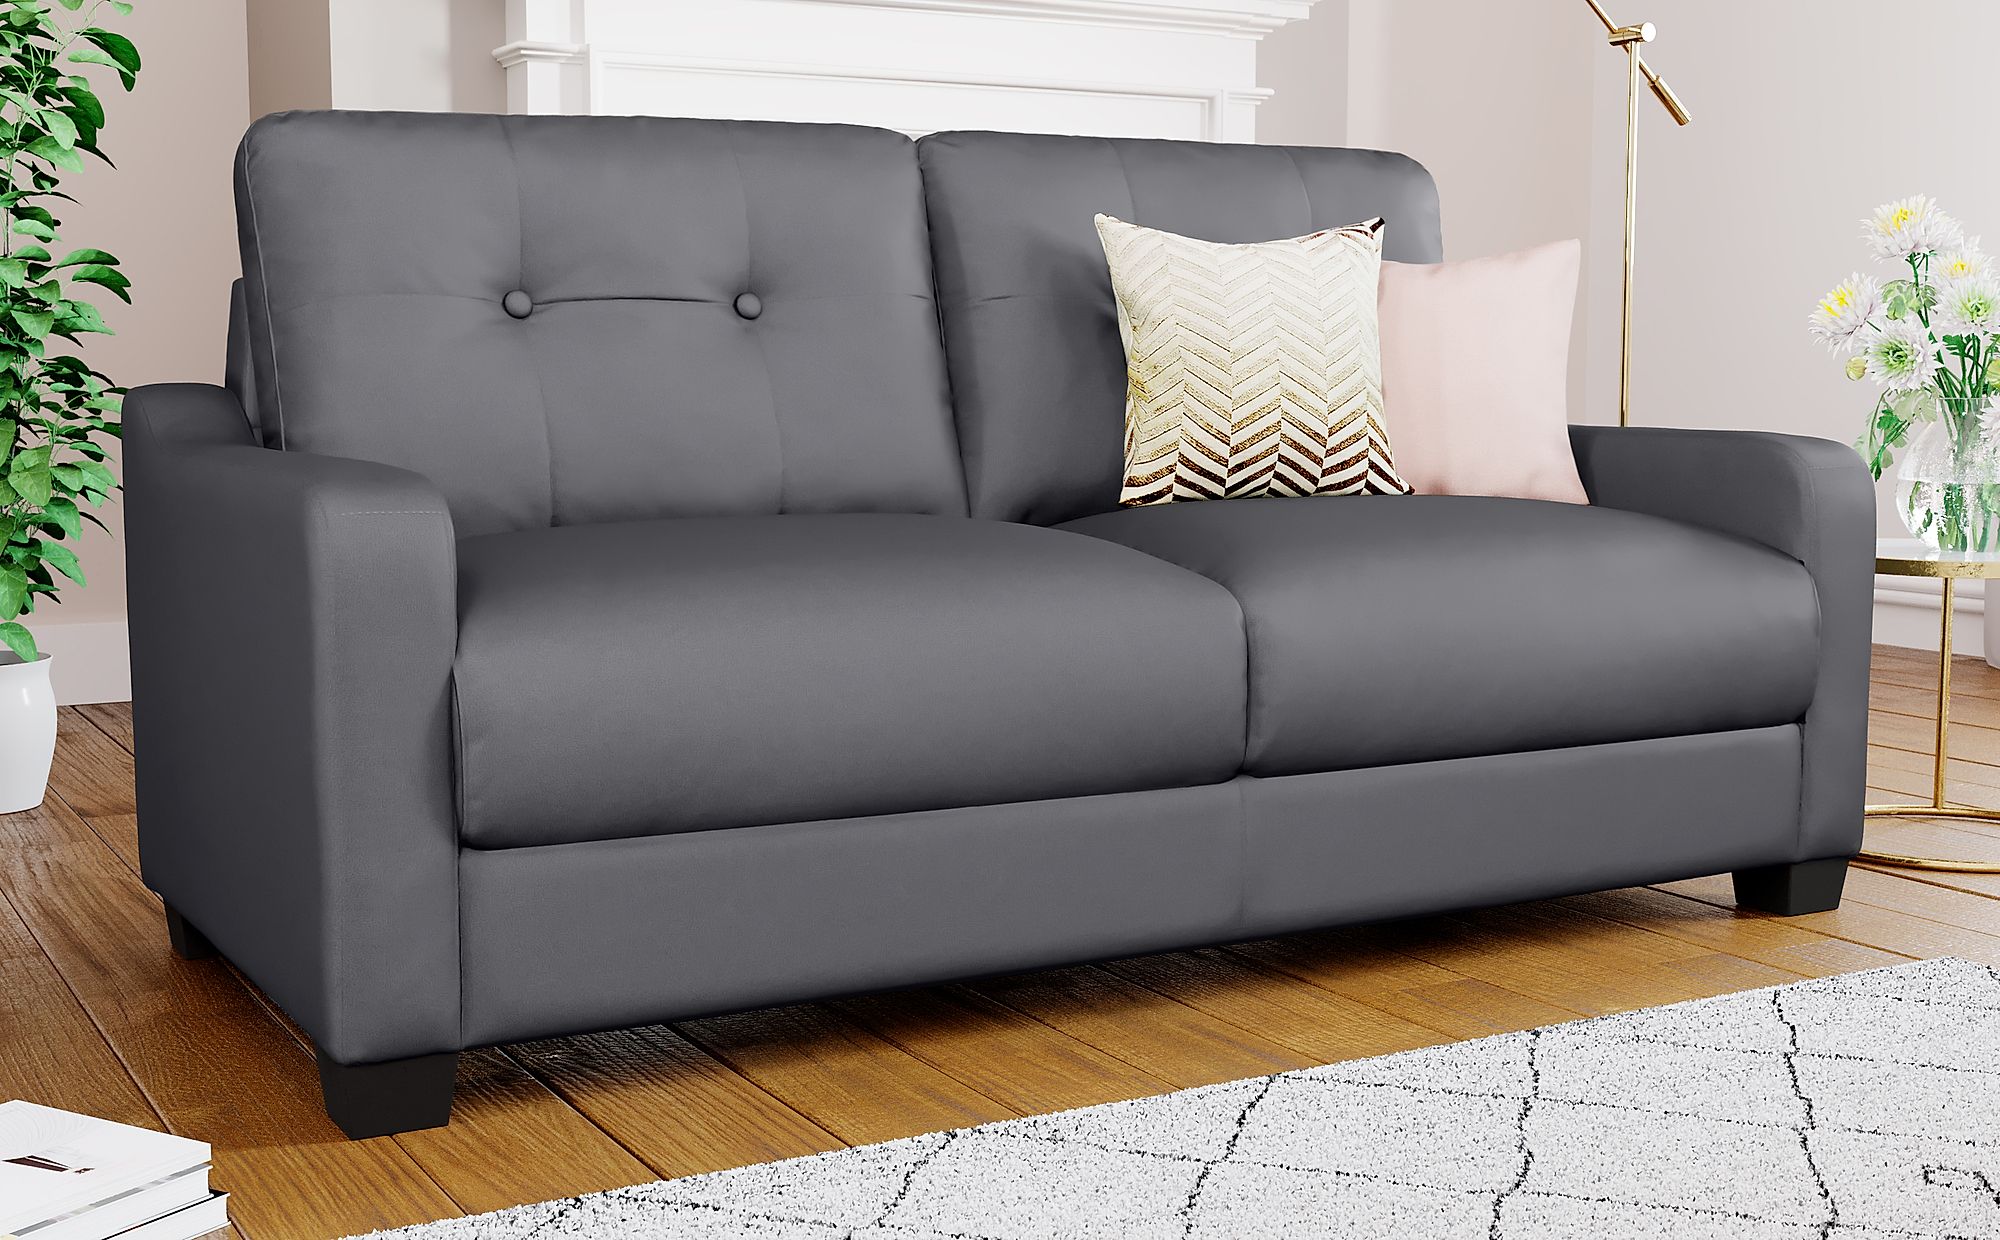 Belmont Grey Leather 3 Seater Sofa Furniture Choice